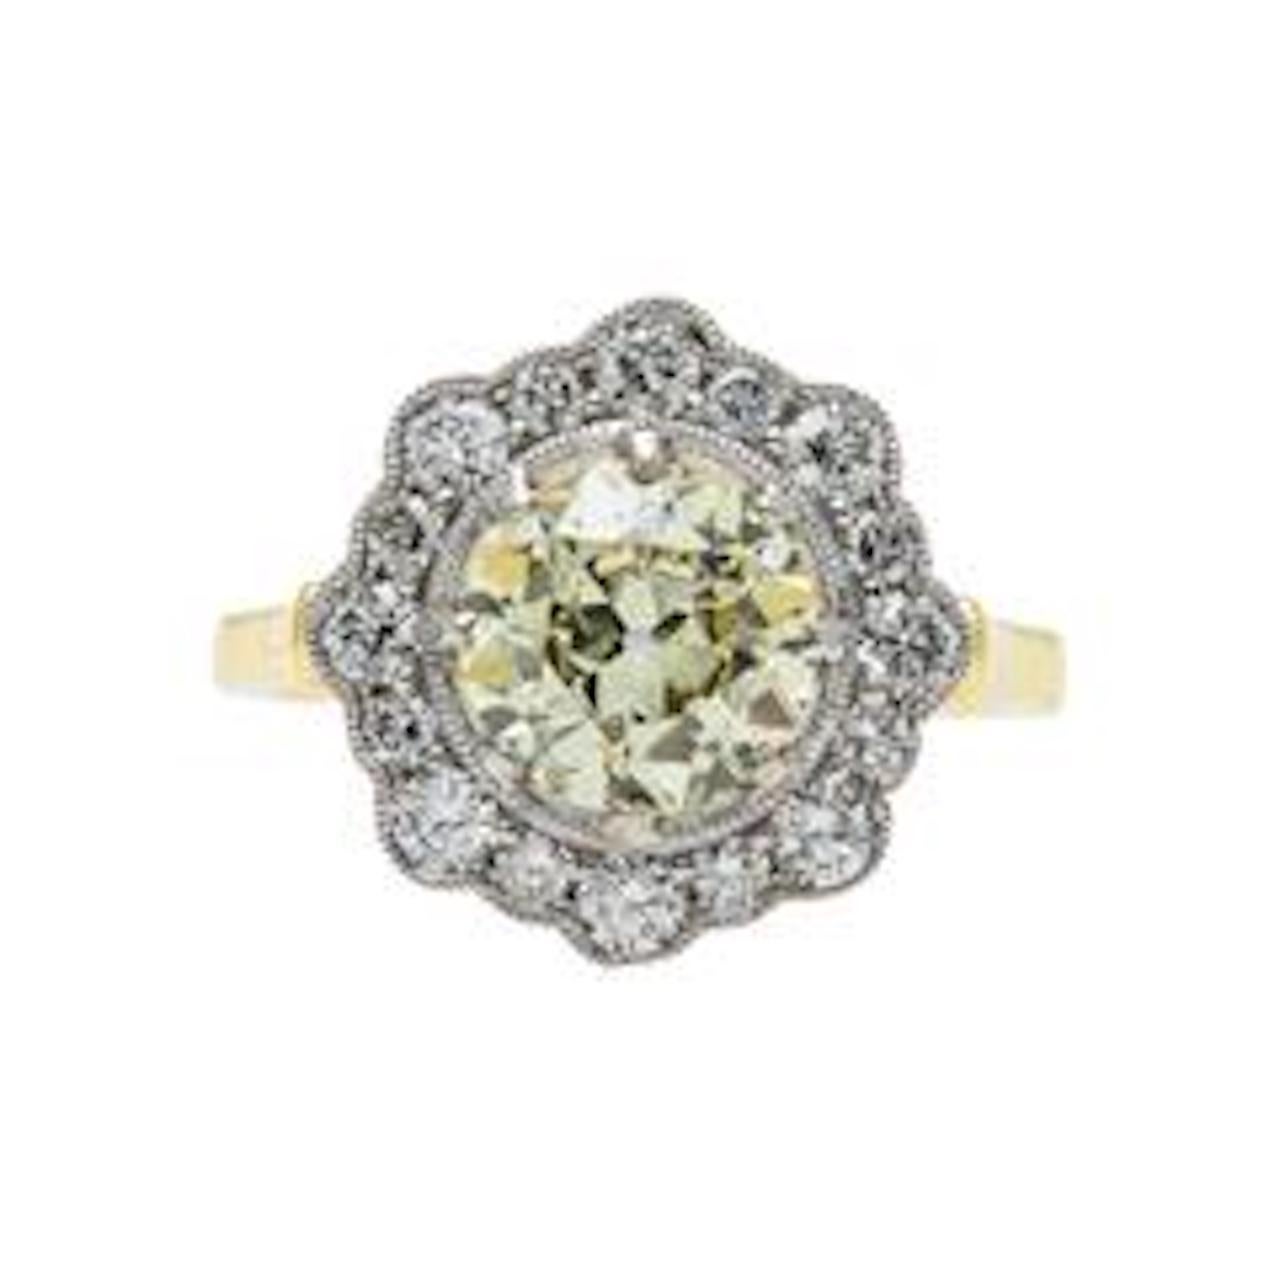 This is a newly-made engagement ring modeled after an original Edwardian era ring. The platinum topped 18k yellow gold ring centers a beautiful Guild Lab certified 1.85ct Fancy Light Yellow Old European cut diamond. The incredibly feminine ring is